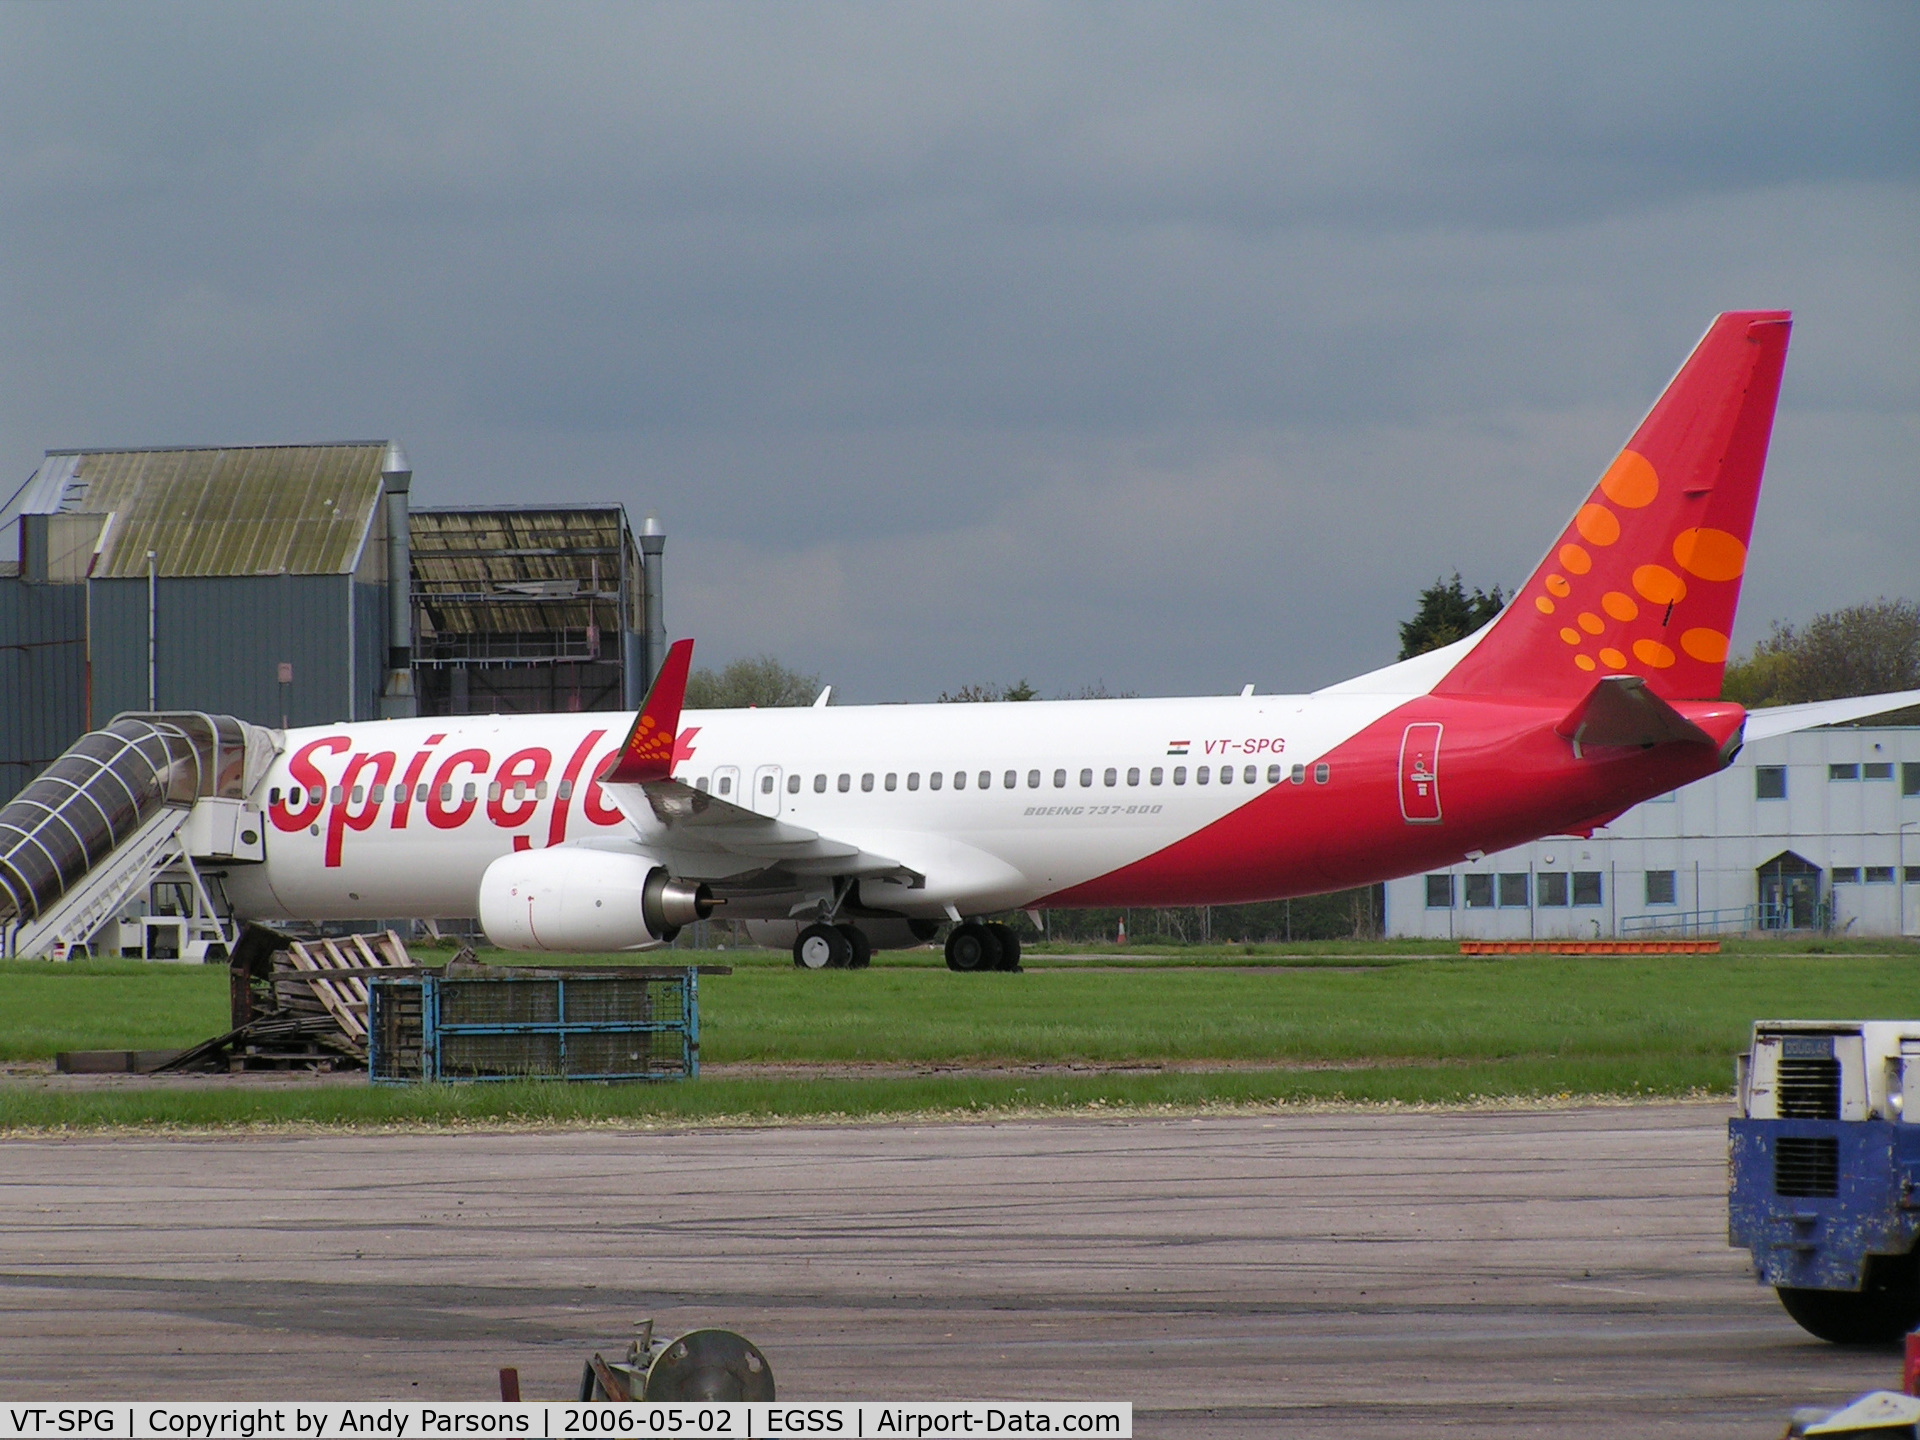 VT-SPG, 2006 Boeing 737-86N C/N 32672, VT-SPG On delivery through stansted